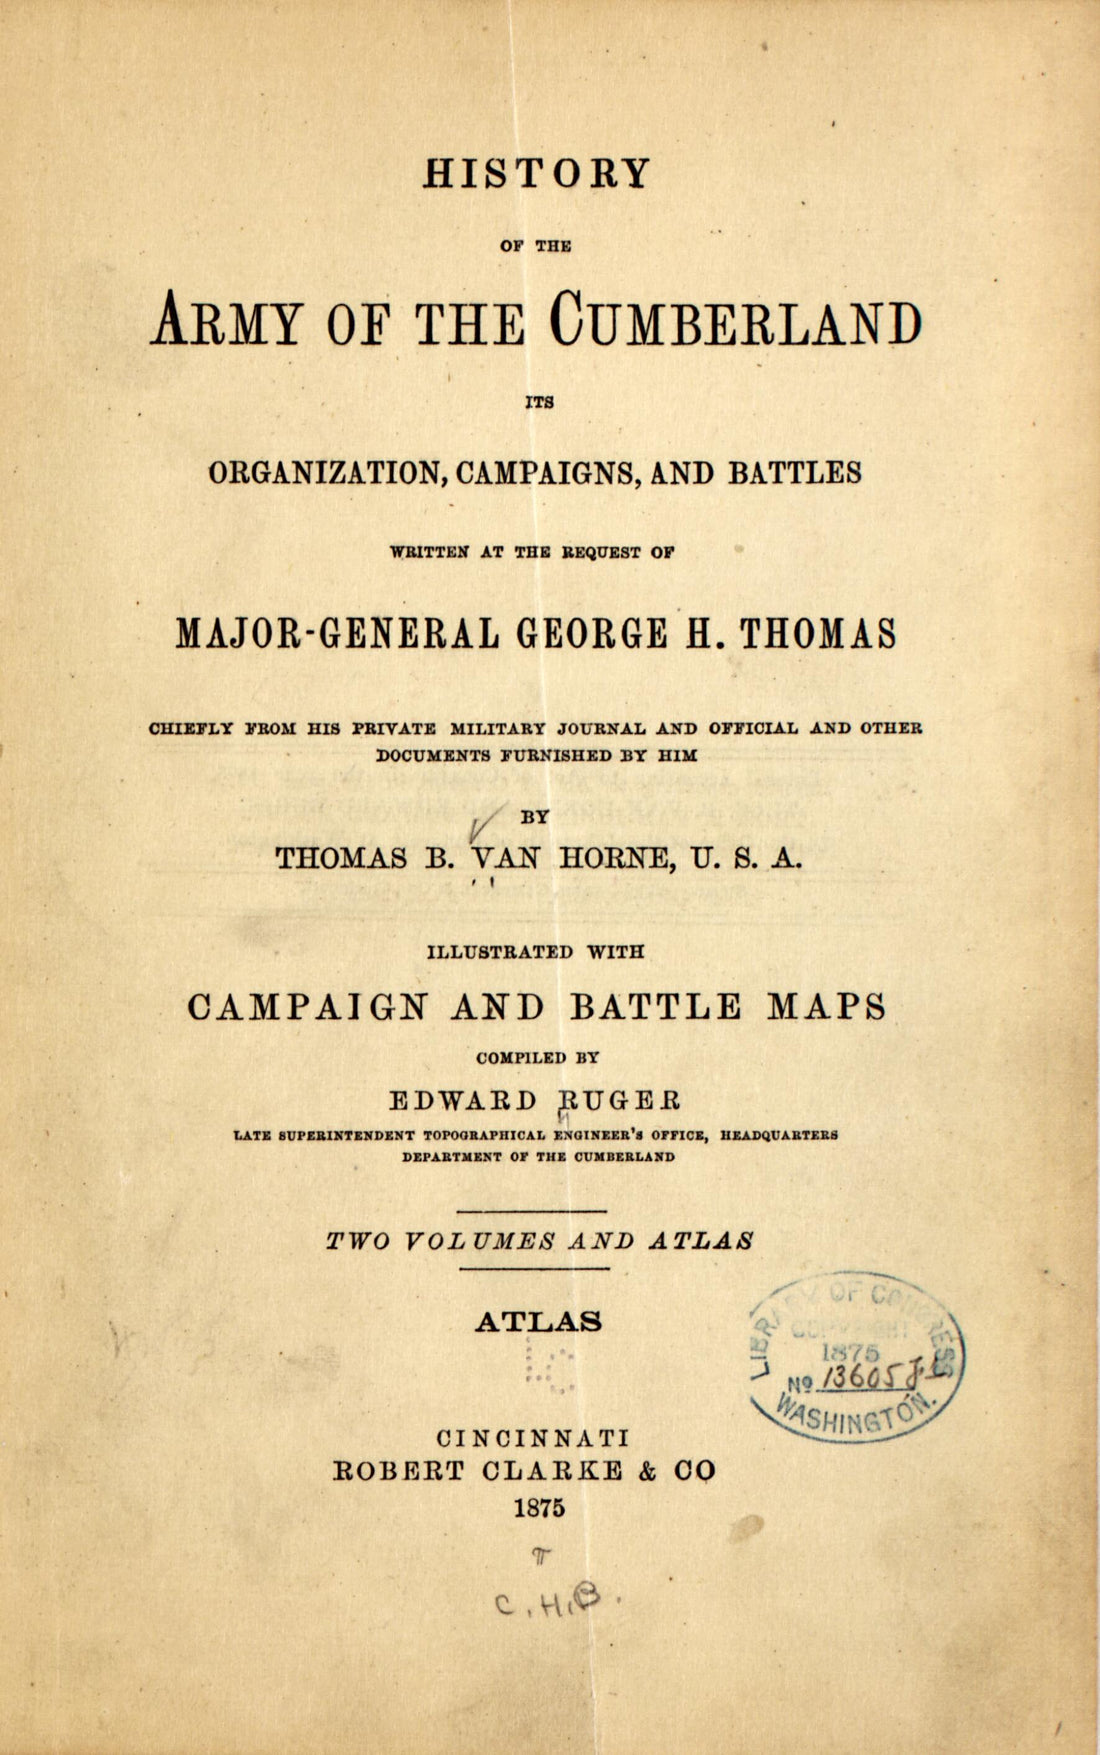 This old map of General George H. Thomas Chiefly from His Private Military Journal and Official and Other Documents Furnished by Him (-atlas) from 1875 was created by Edward Ruger, George H. (George Henry) Thomas, Thomas B. (Thomas Budd) Van Horne in 187